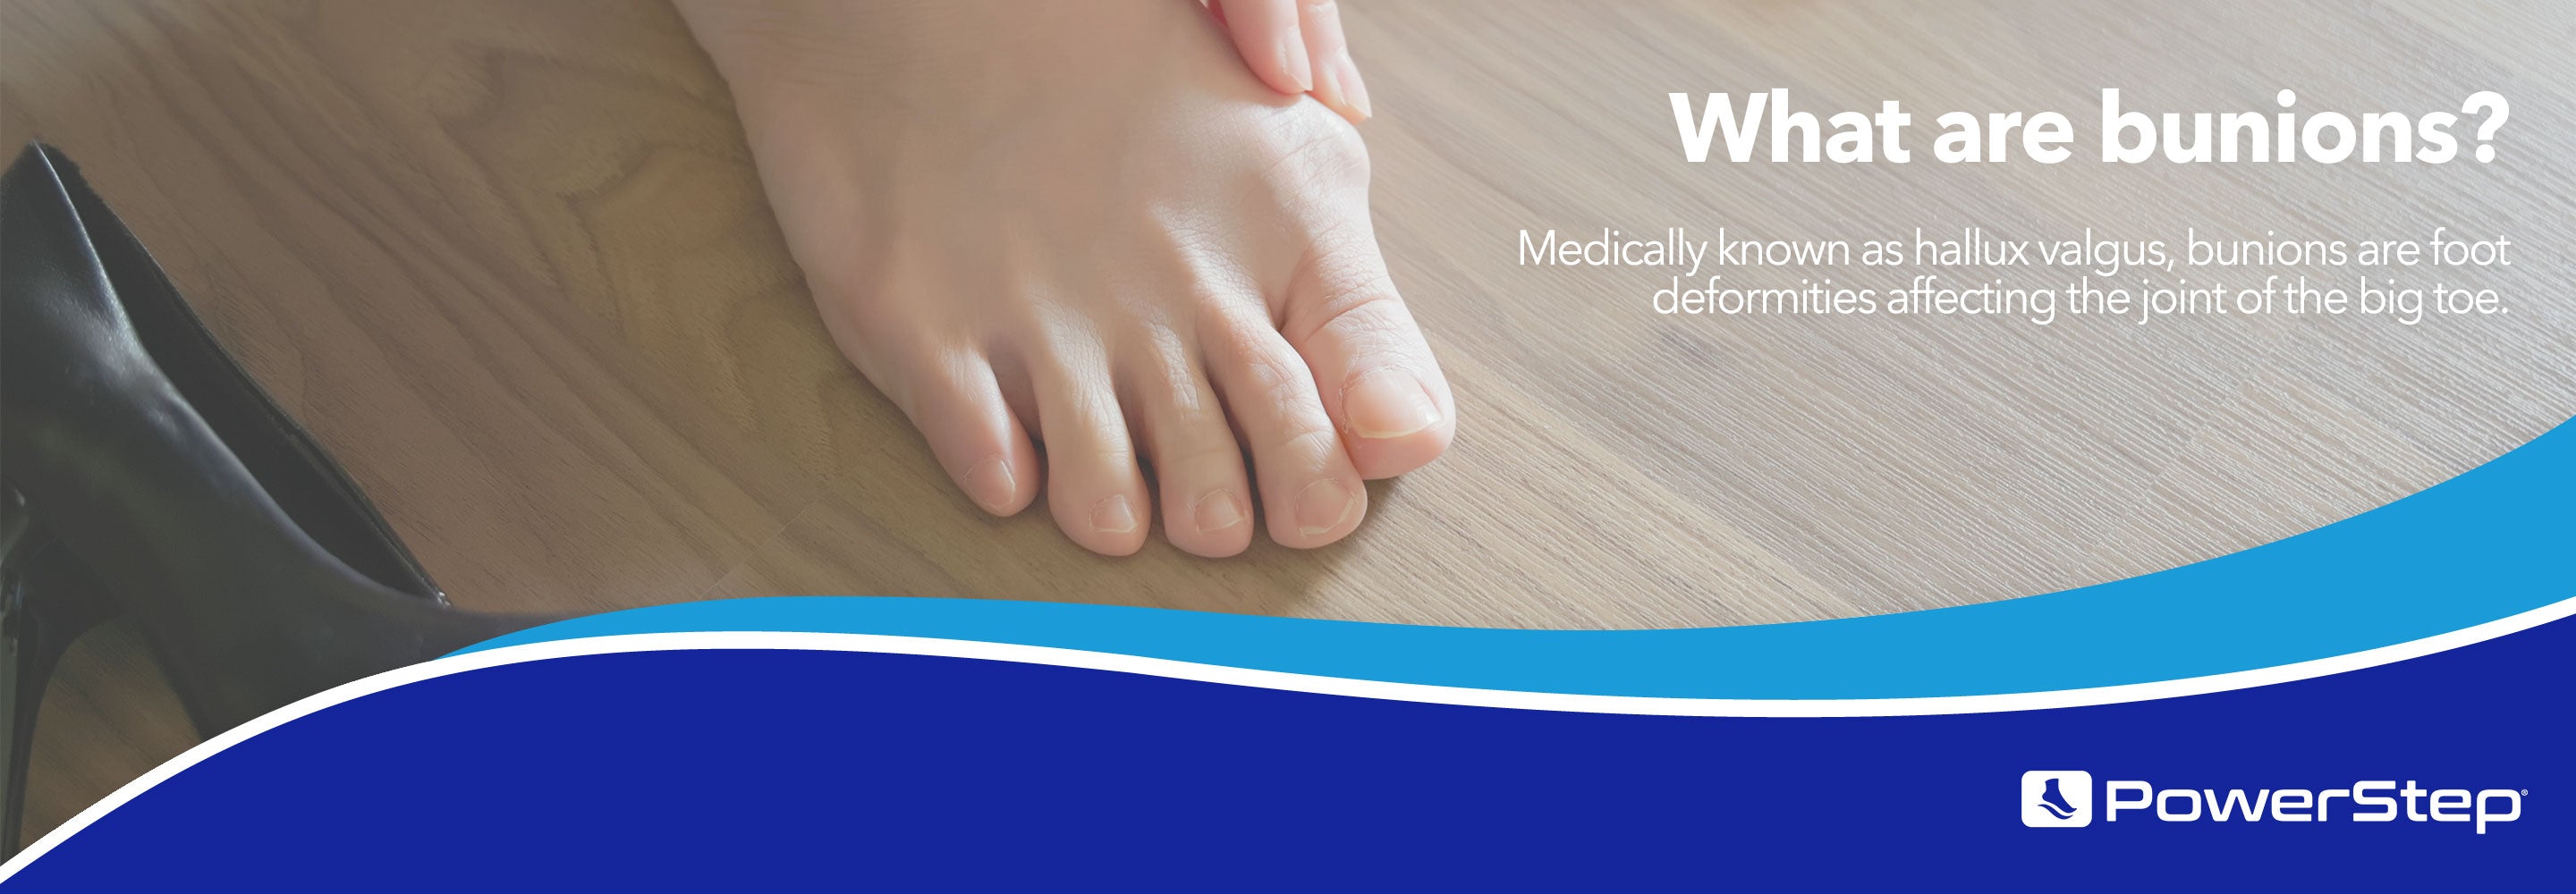 What are bunions? Medically known as hallux valgus, bunions are foot deformities affecting the joint of the big toe.